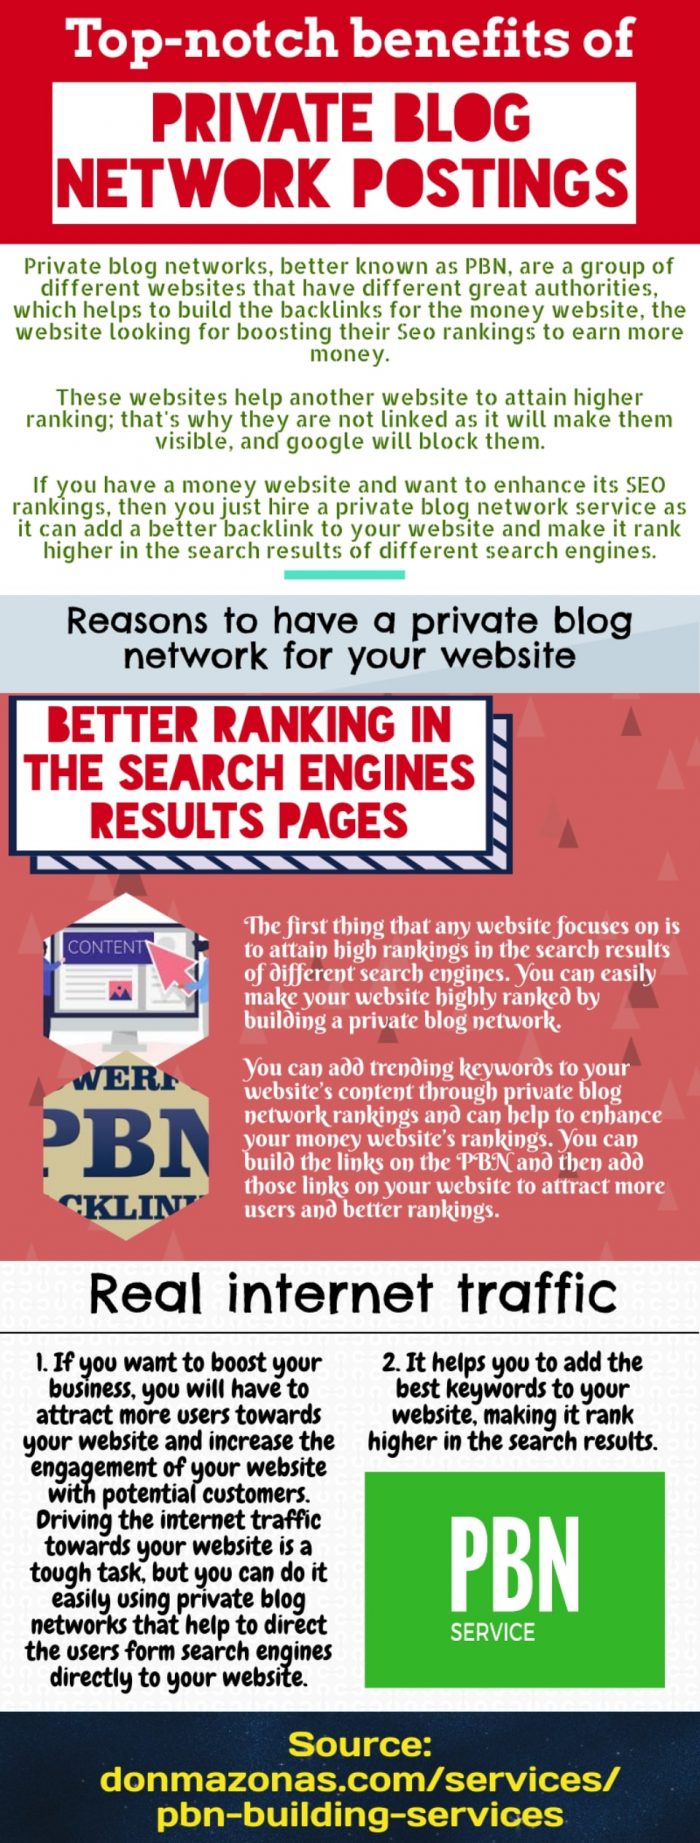 Top-notch advantages that can be achieved by you from the private blog networks